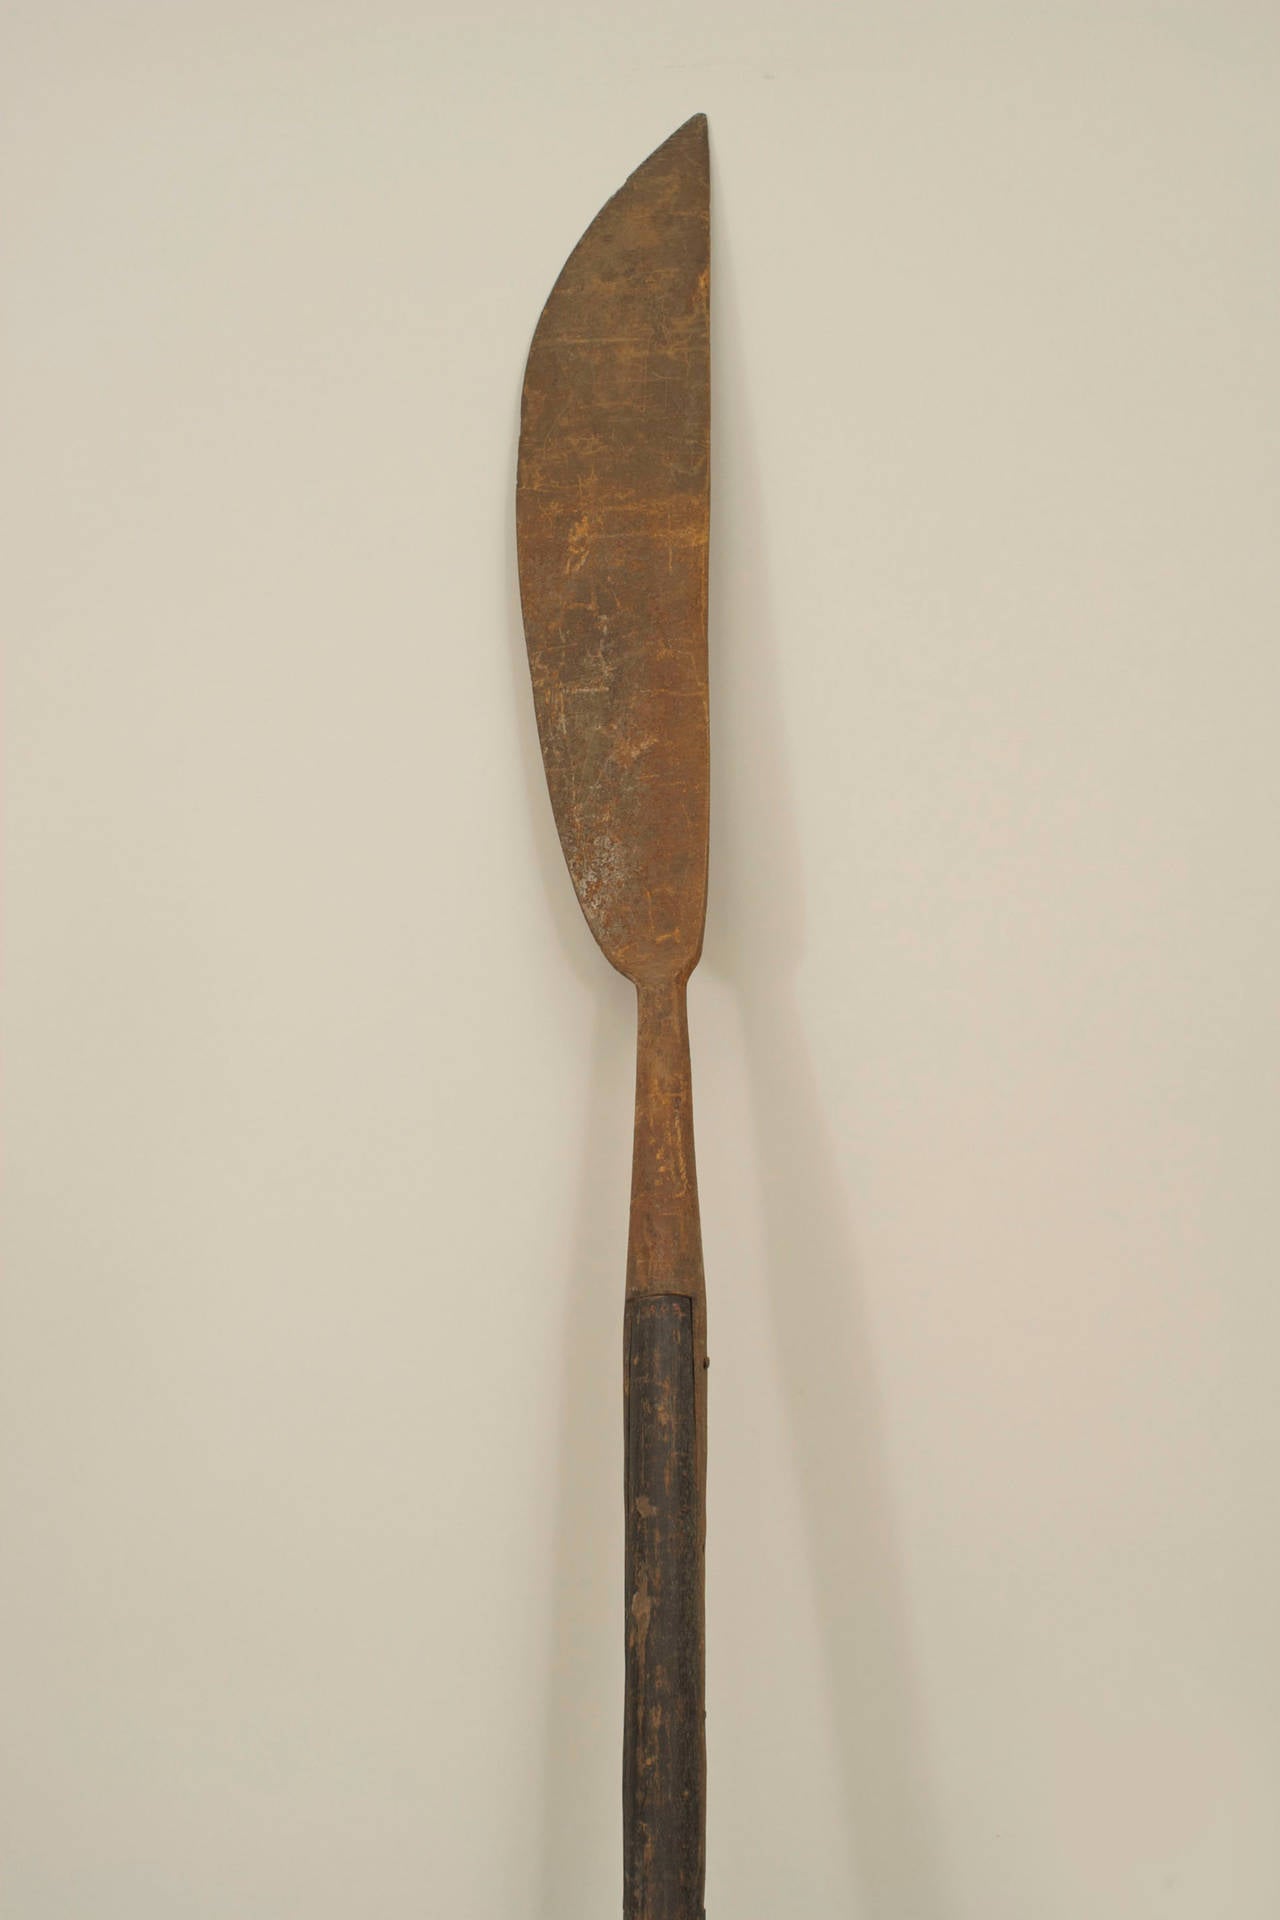 English Renaissance style Halbert spear with wood shaft and large 34